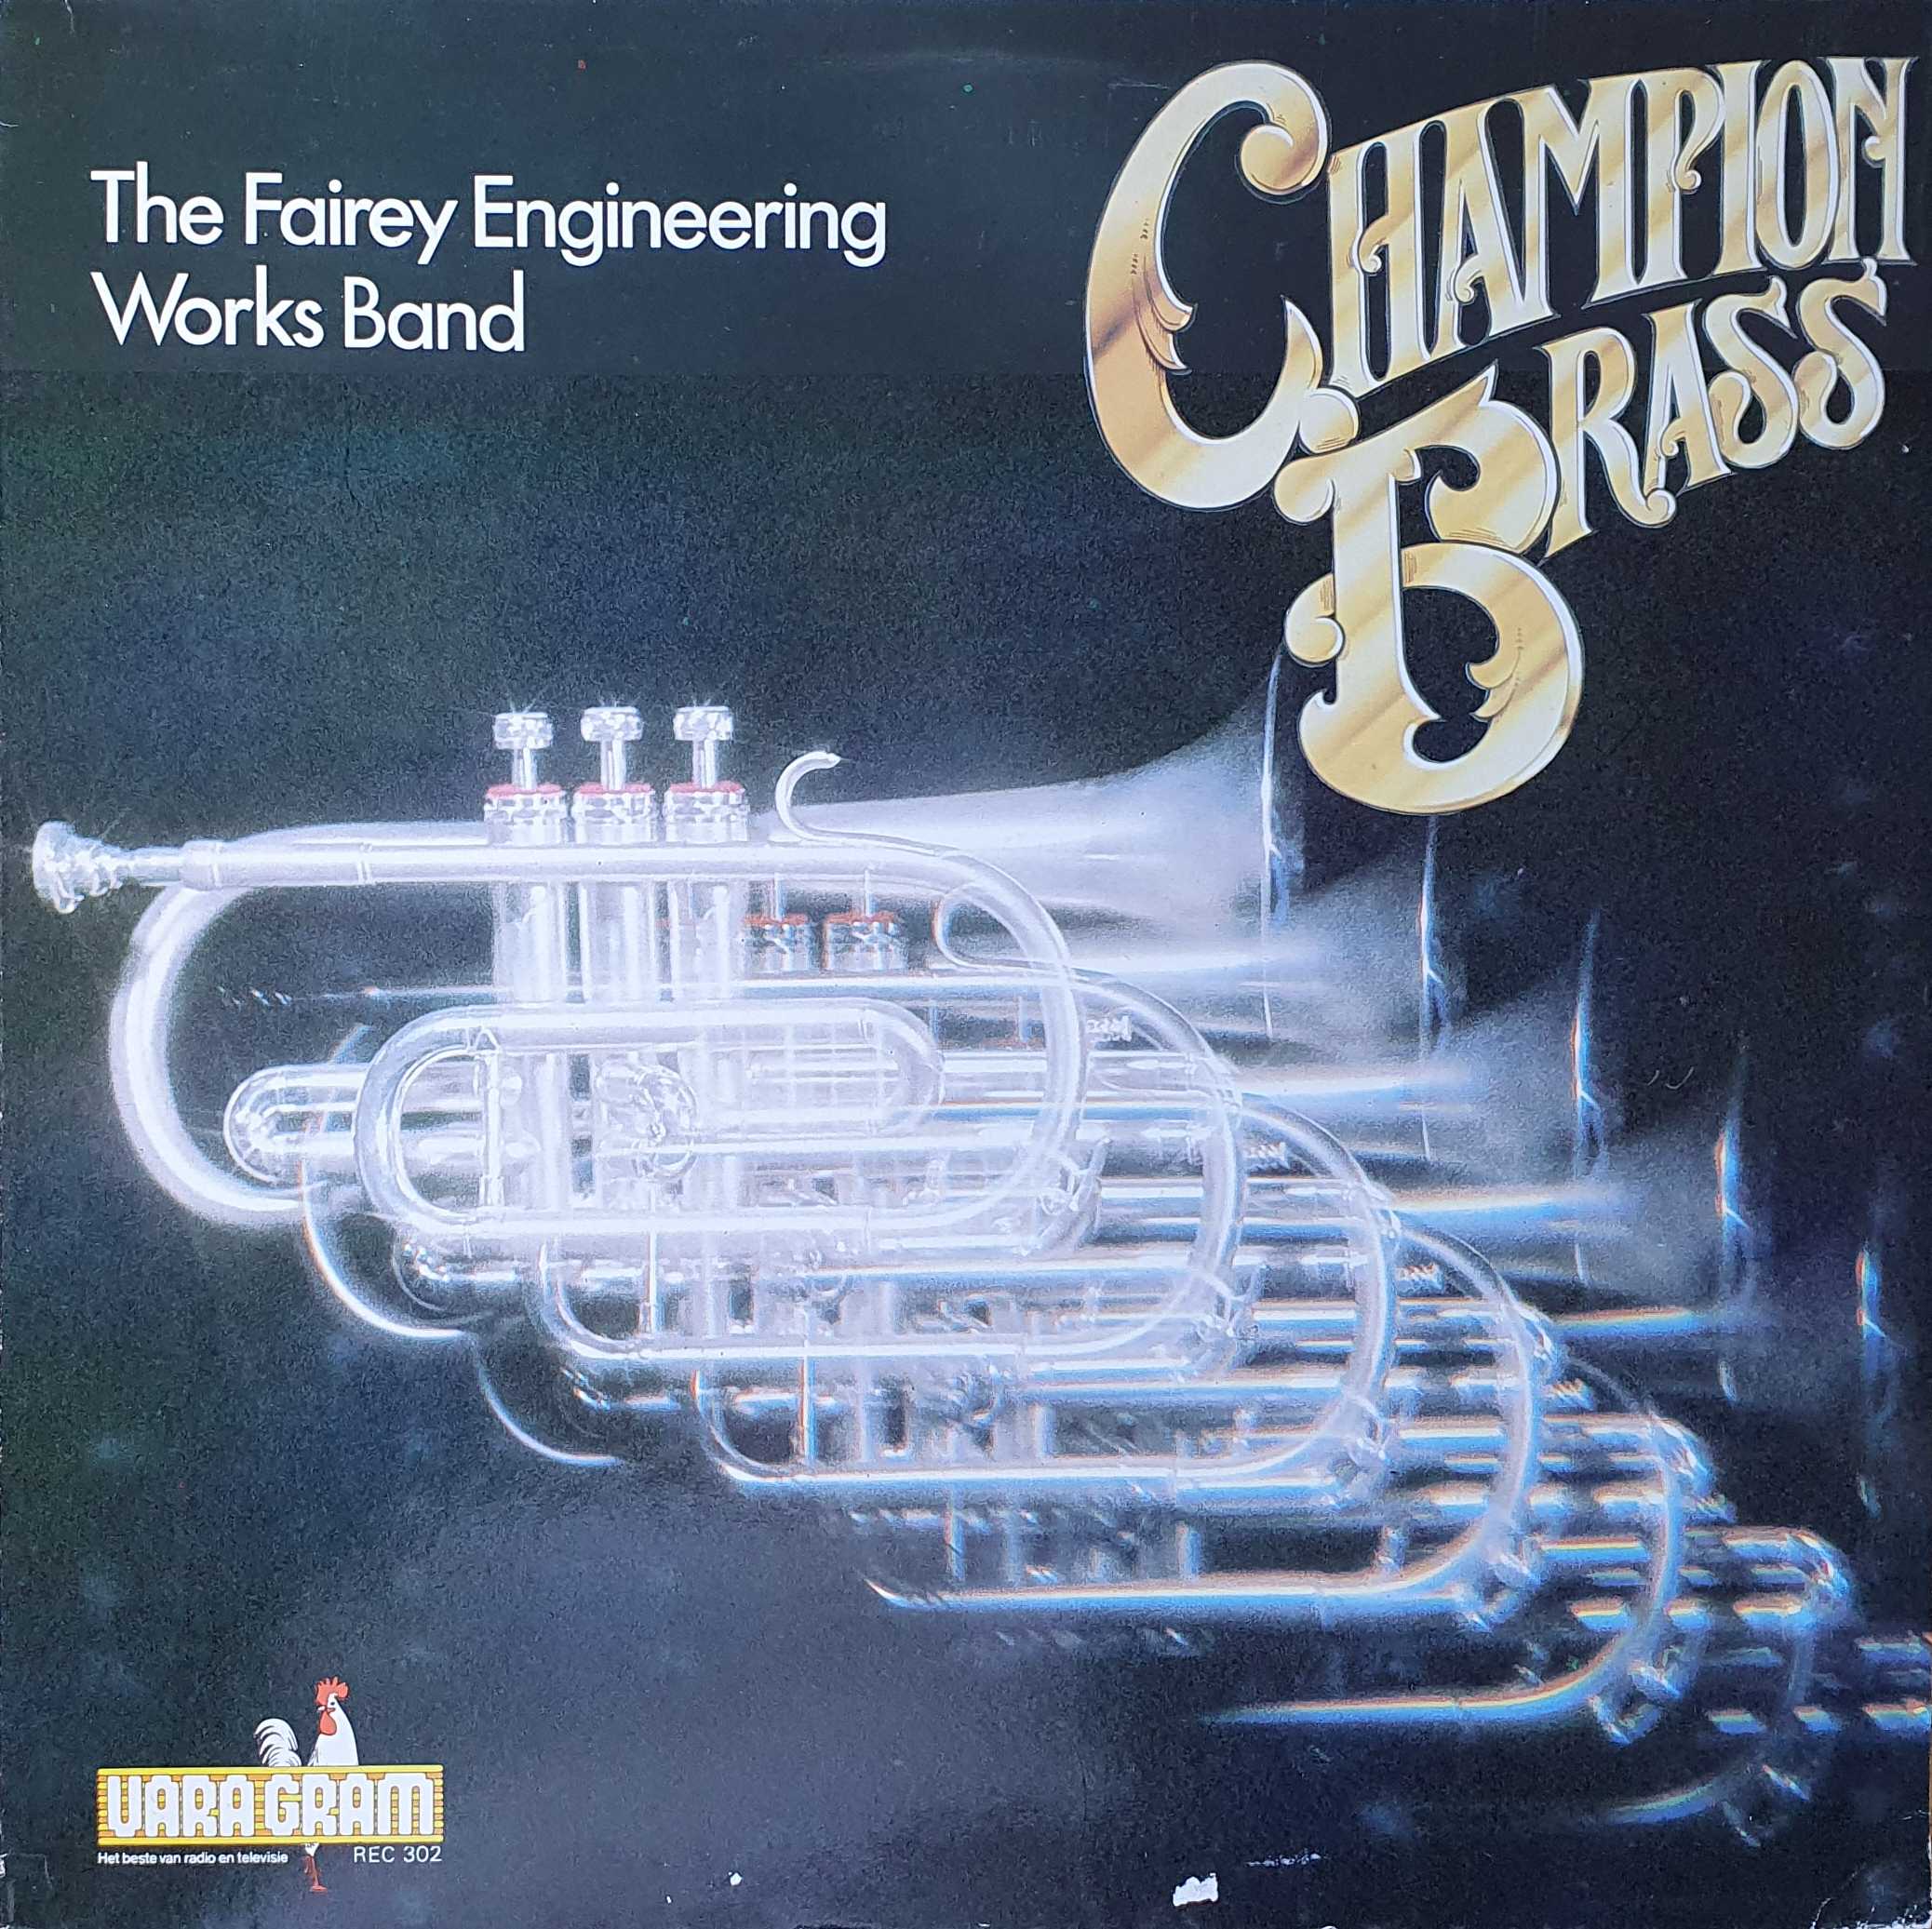 Picture of REC 302-iD The Fairey Engineering Works band - Champion brass by artist Various from the BBC albums - Records and Tapes library